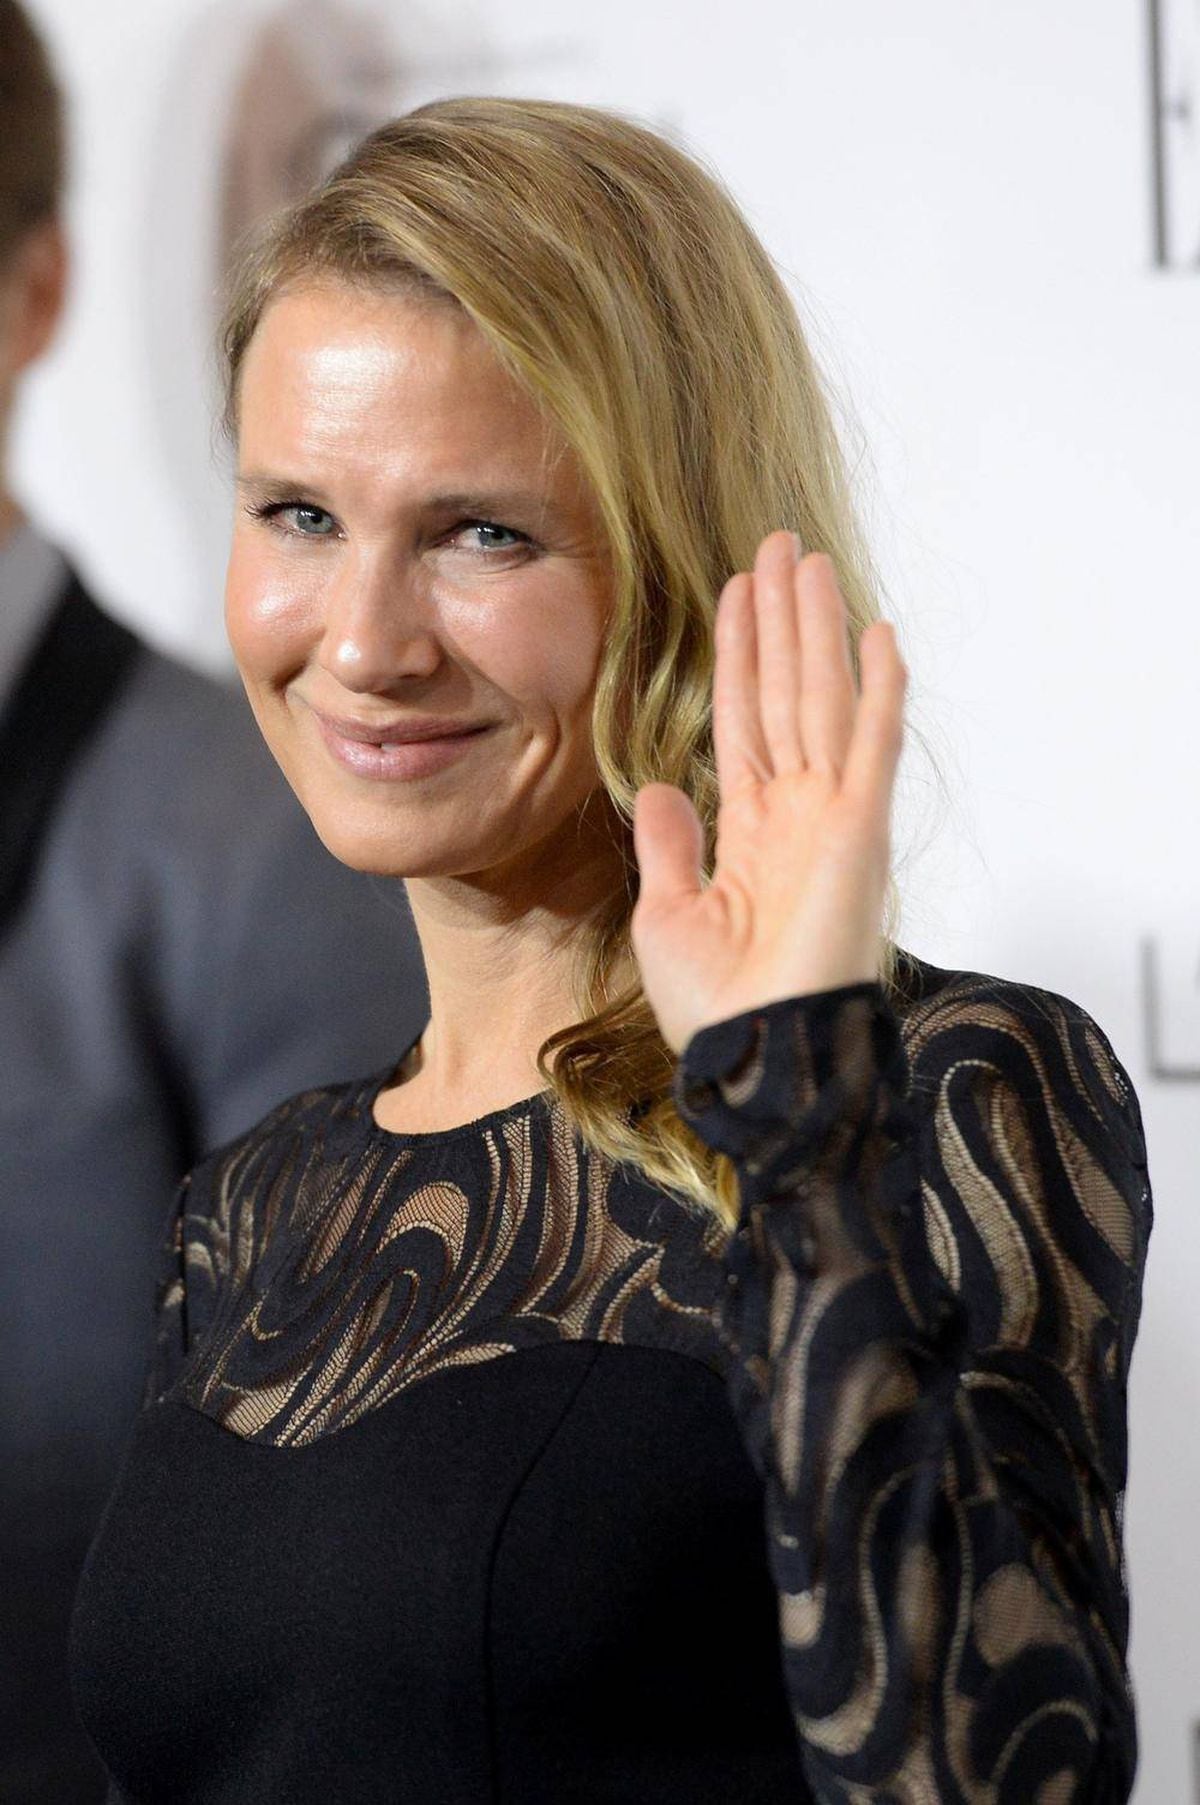 Leah McLaren: Renée Zellweger makes us face a cultural fallacy - The Globe and Mail